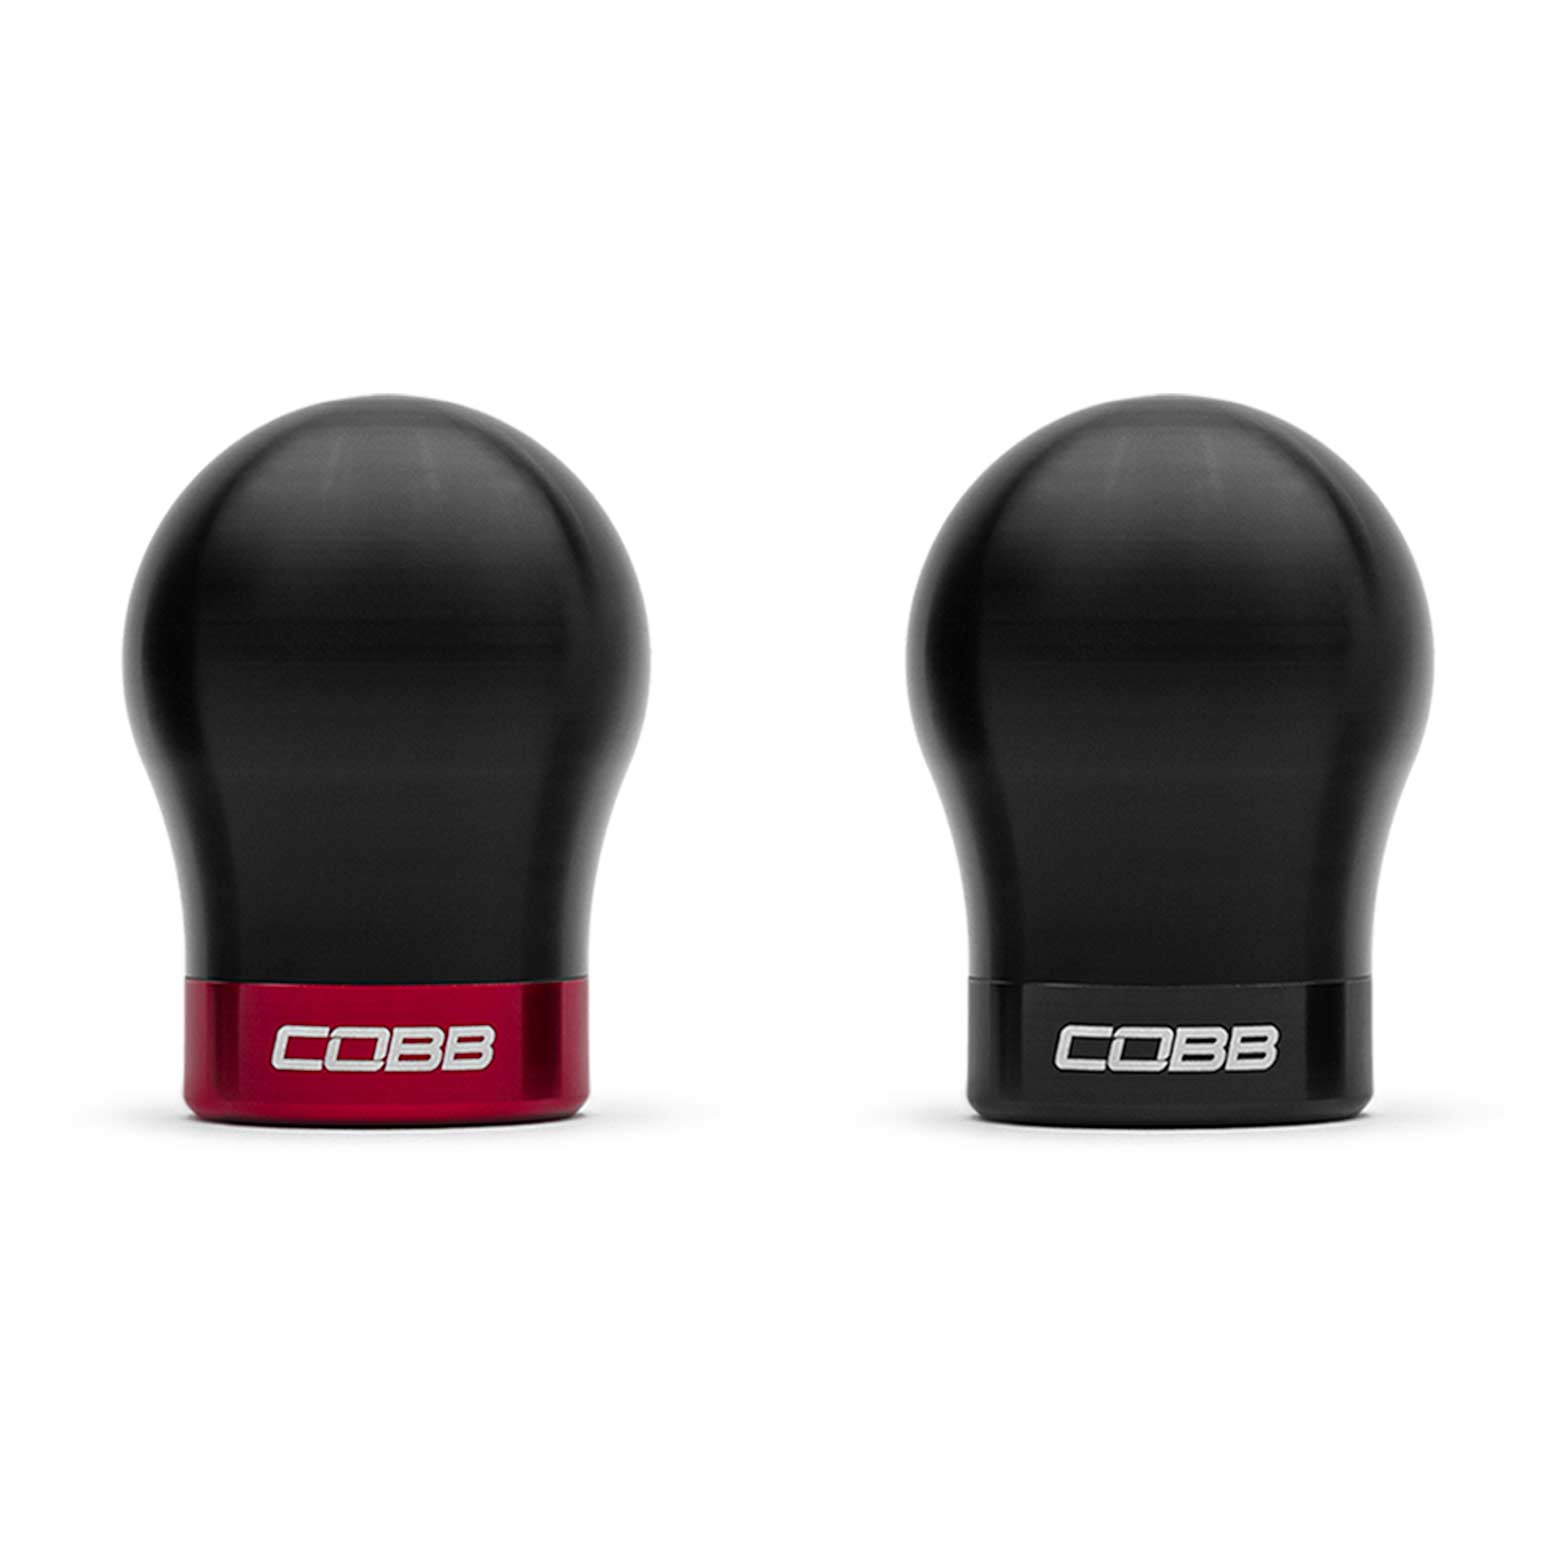 SHORT WEIGHTED COBB KNOB FOR SUBARU BRZ, SCION FR-S, TOYOTA GT-86/GR86, FORD FOCUS ST/RS, FIESTA ST